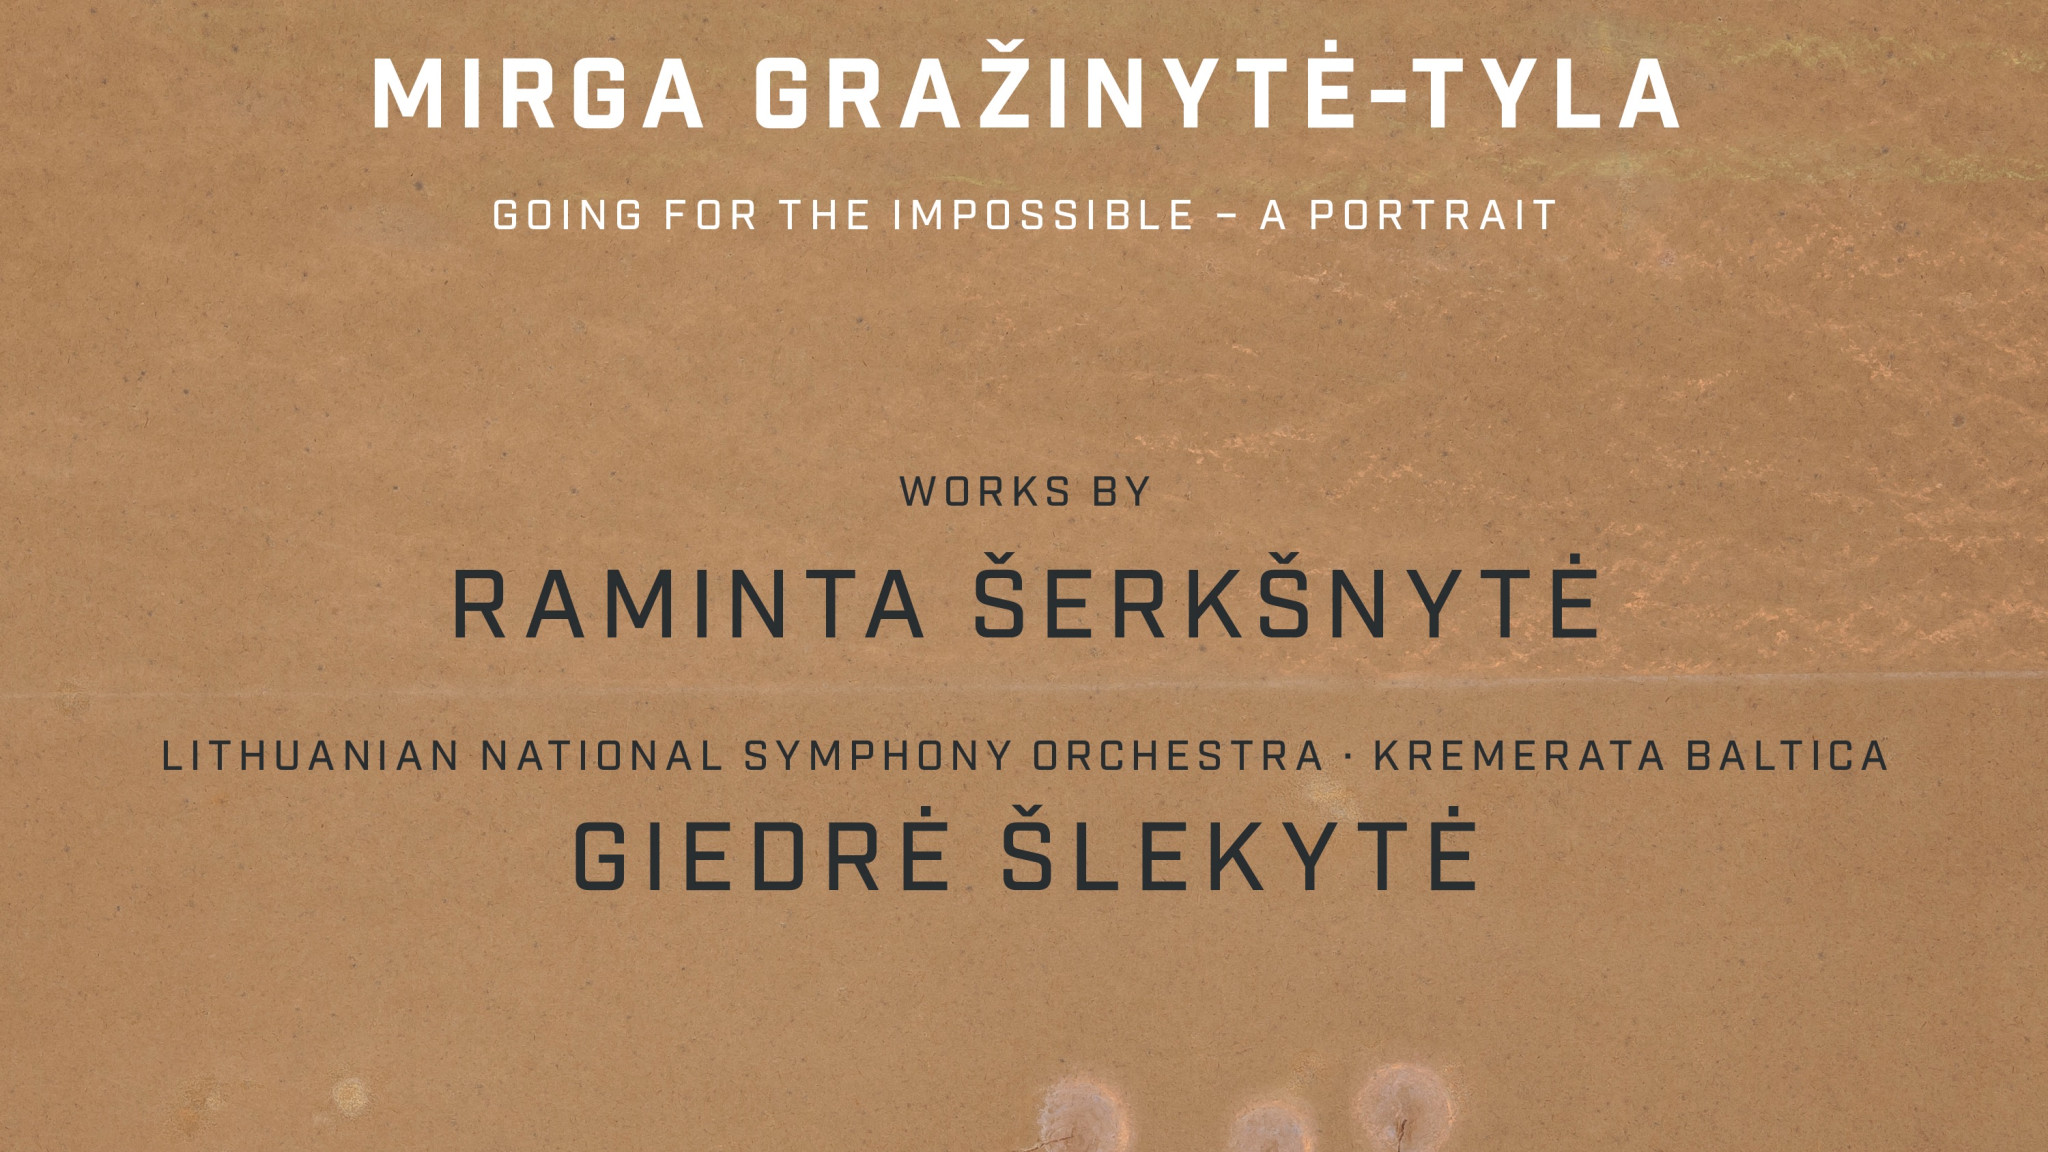 Mirga Gražinytė-Tyla – Going for the impossible - a portrait